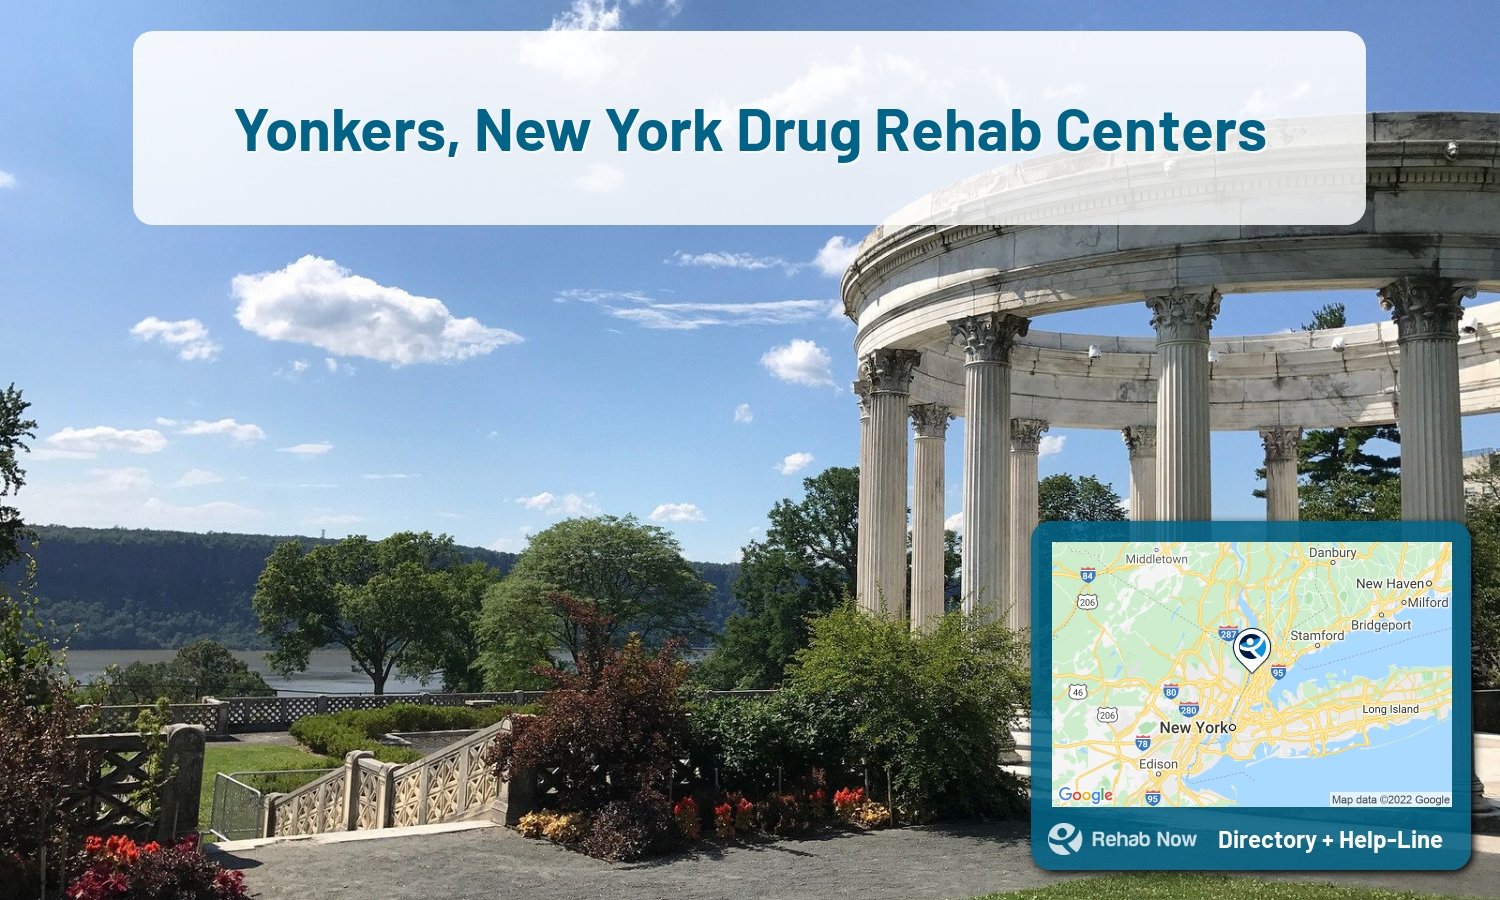 View options, availability, treatment methods, and more, for drug rehab and alcohol treatment in Yonkers, New York